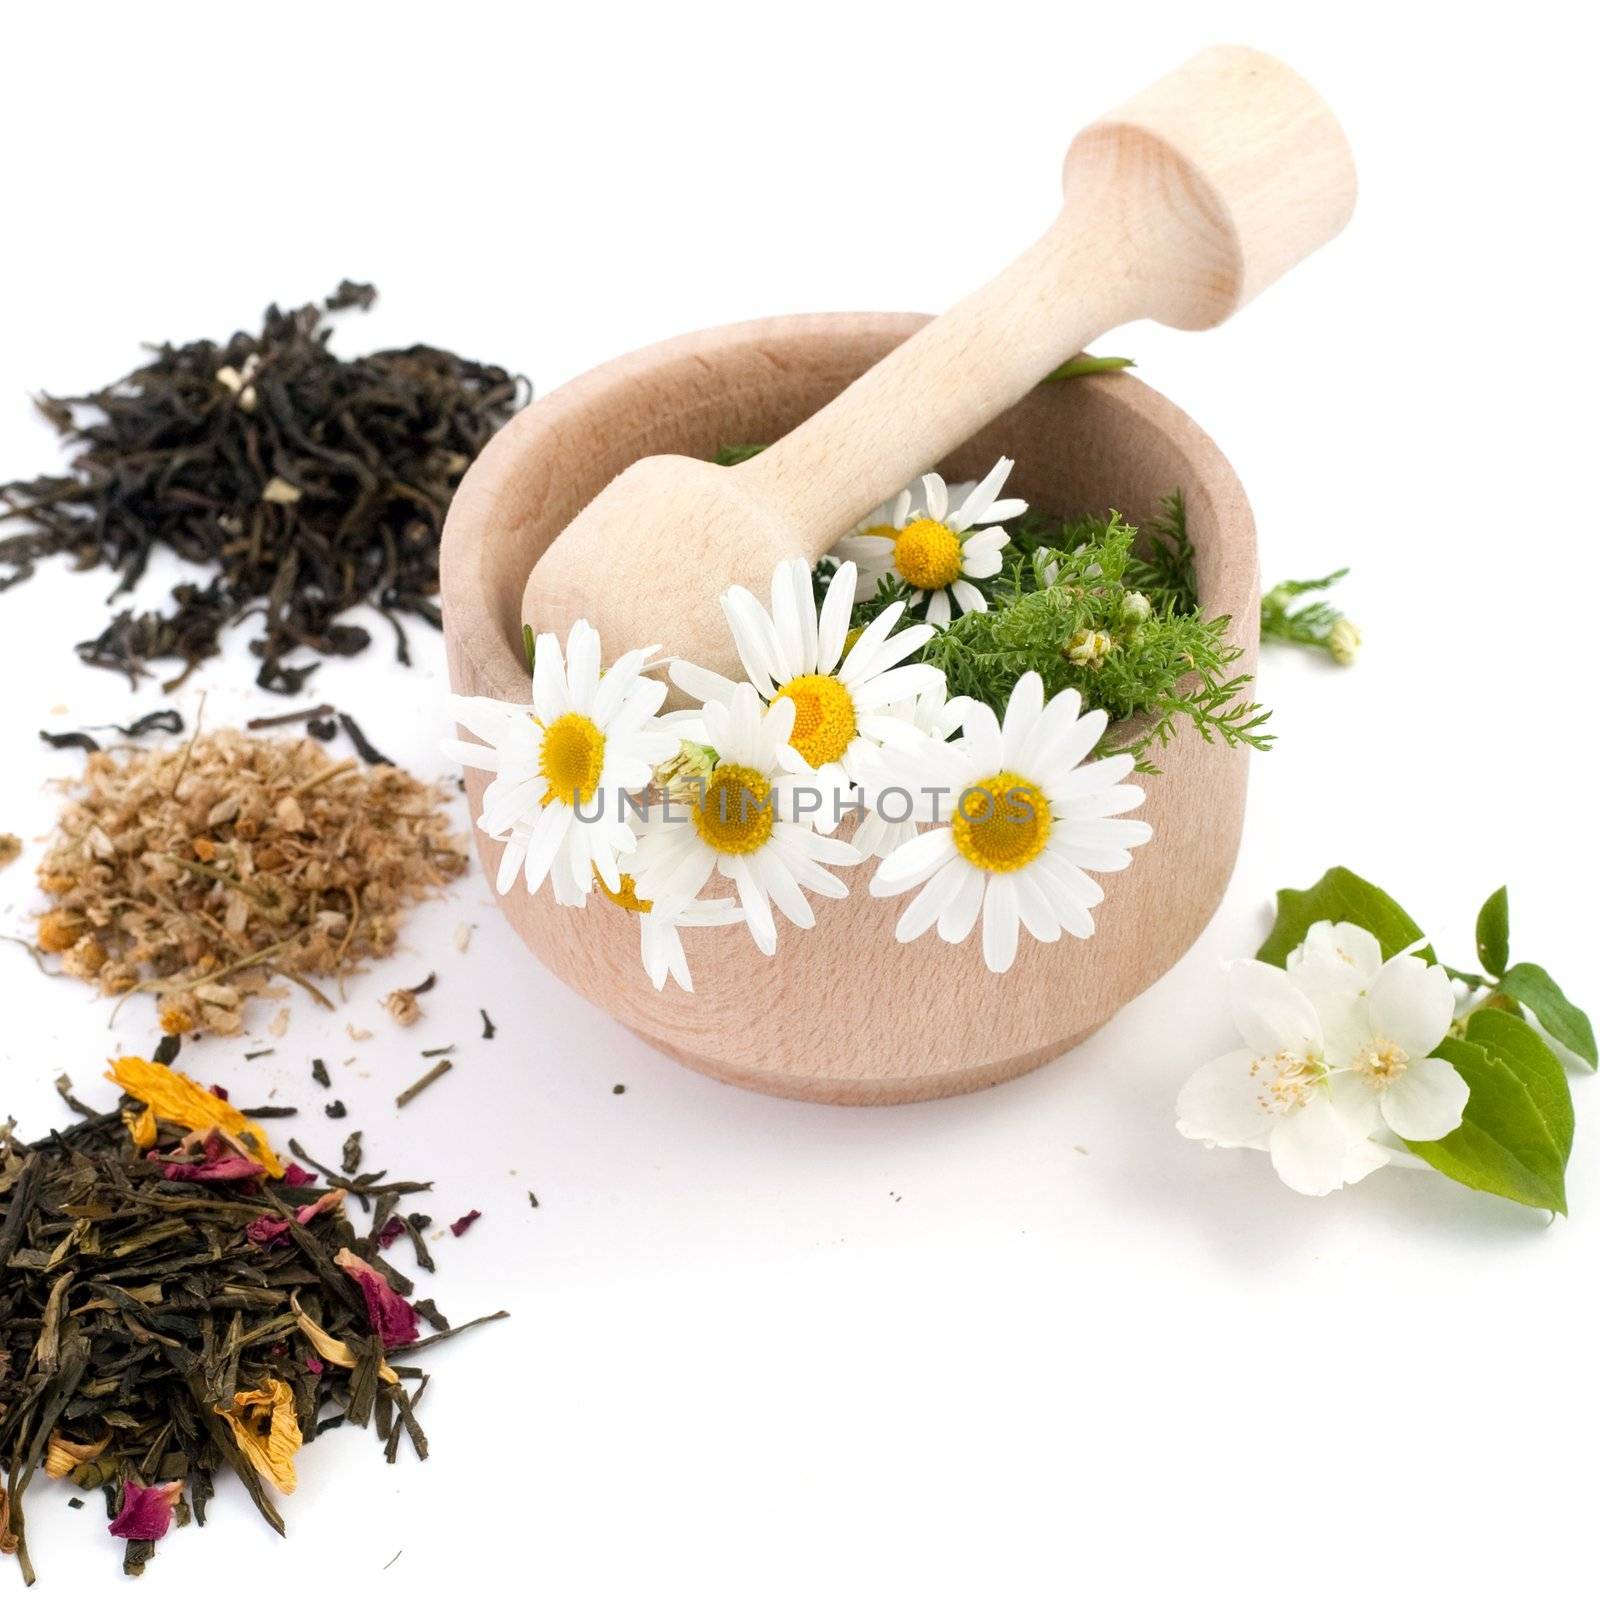 An image of wooden mortar with flowers in it and tea